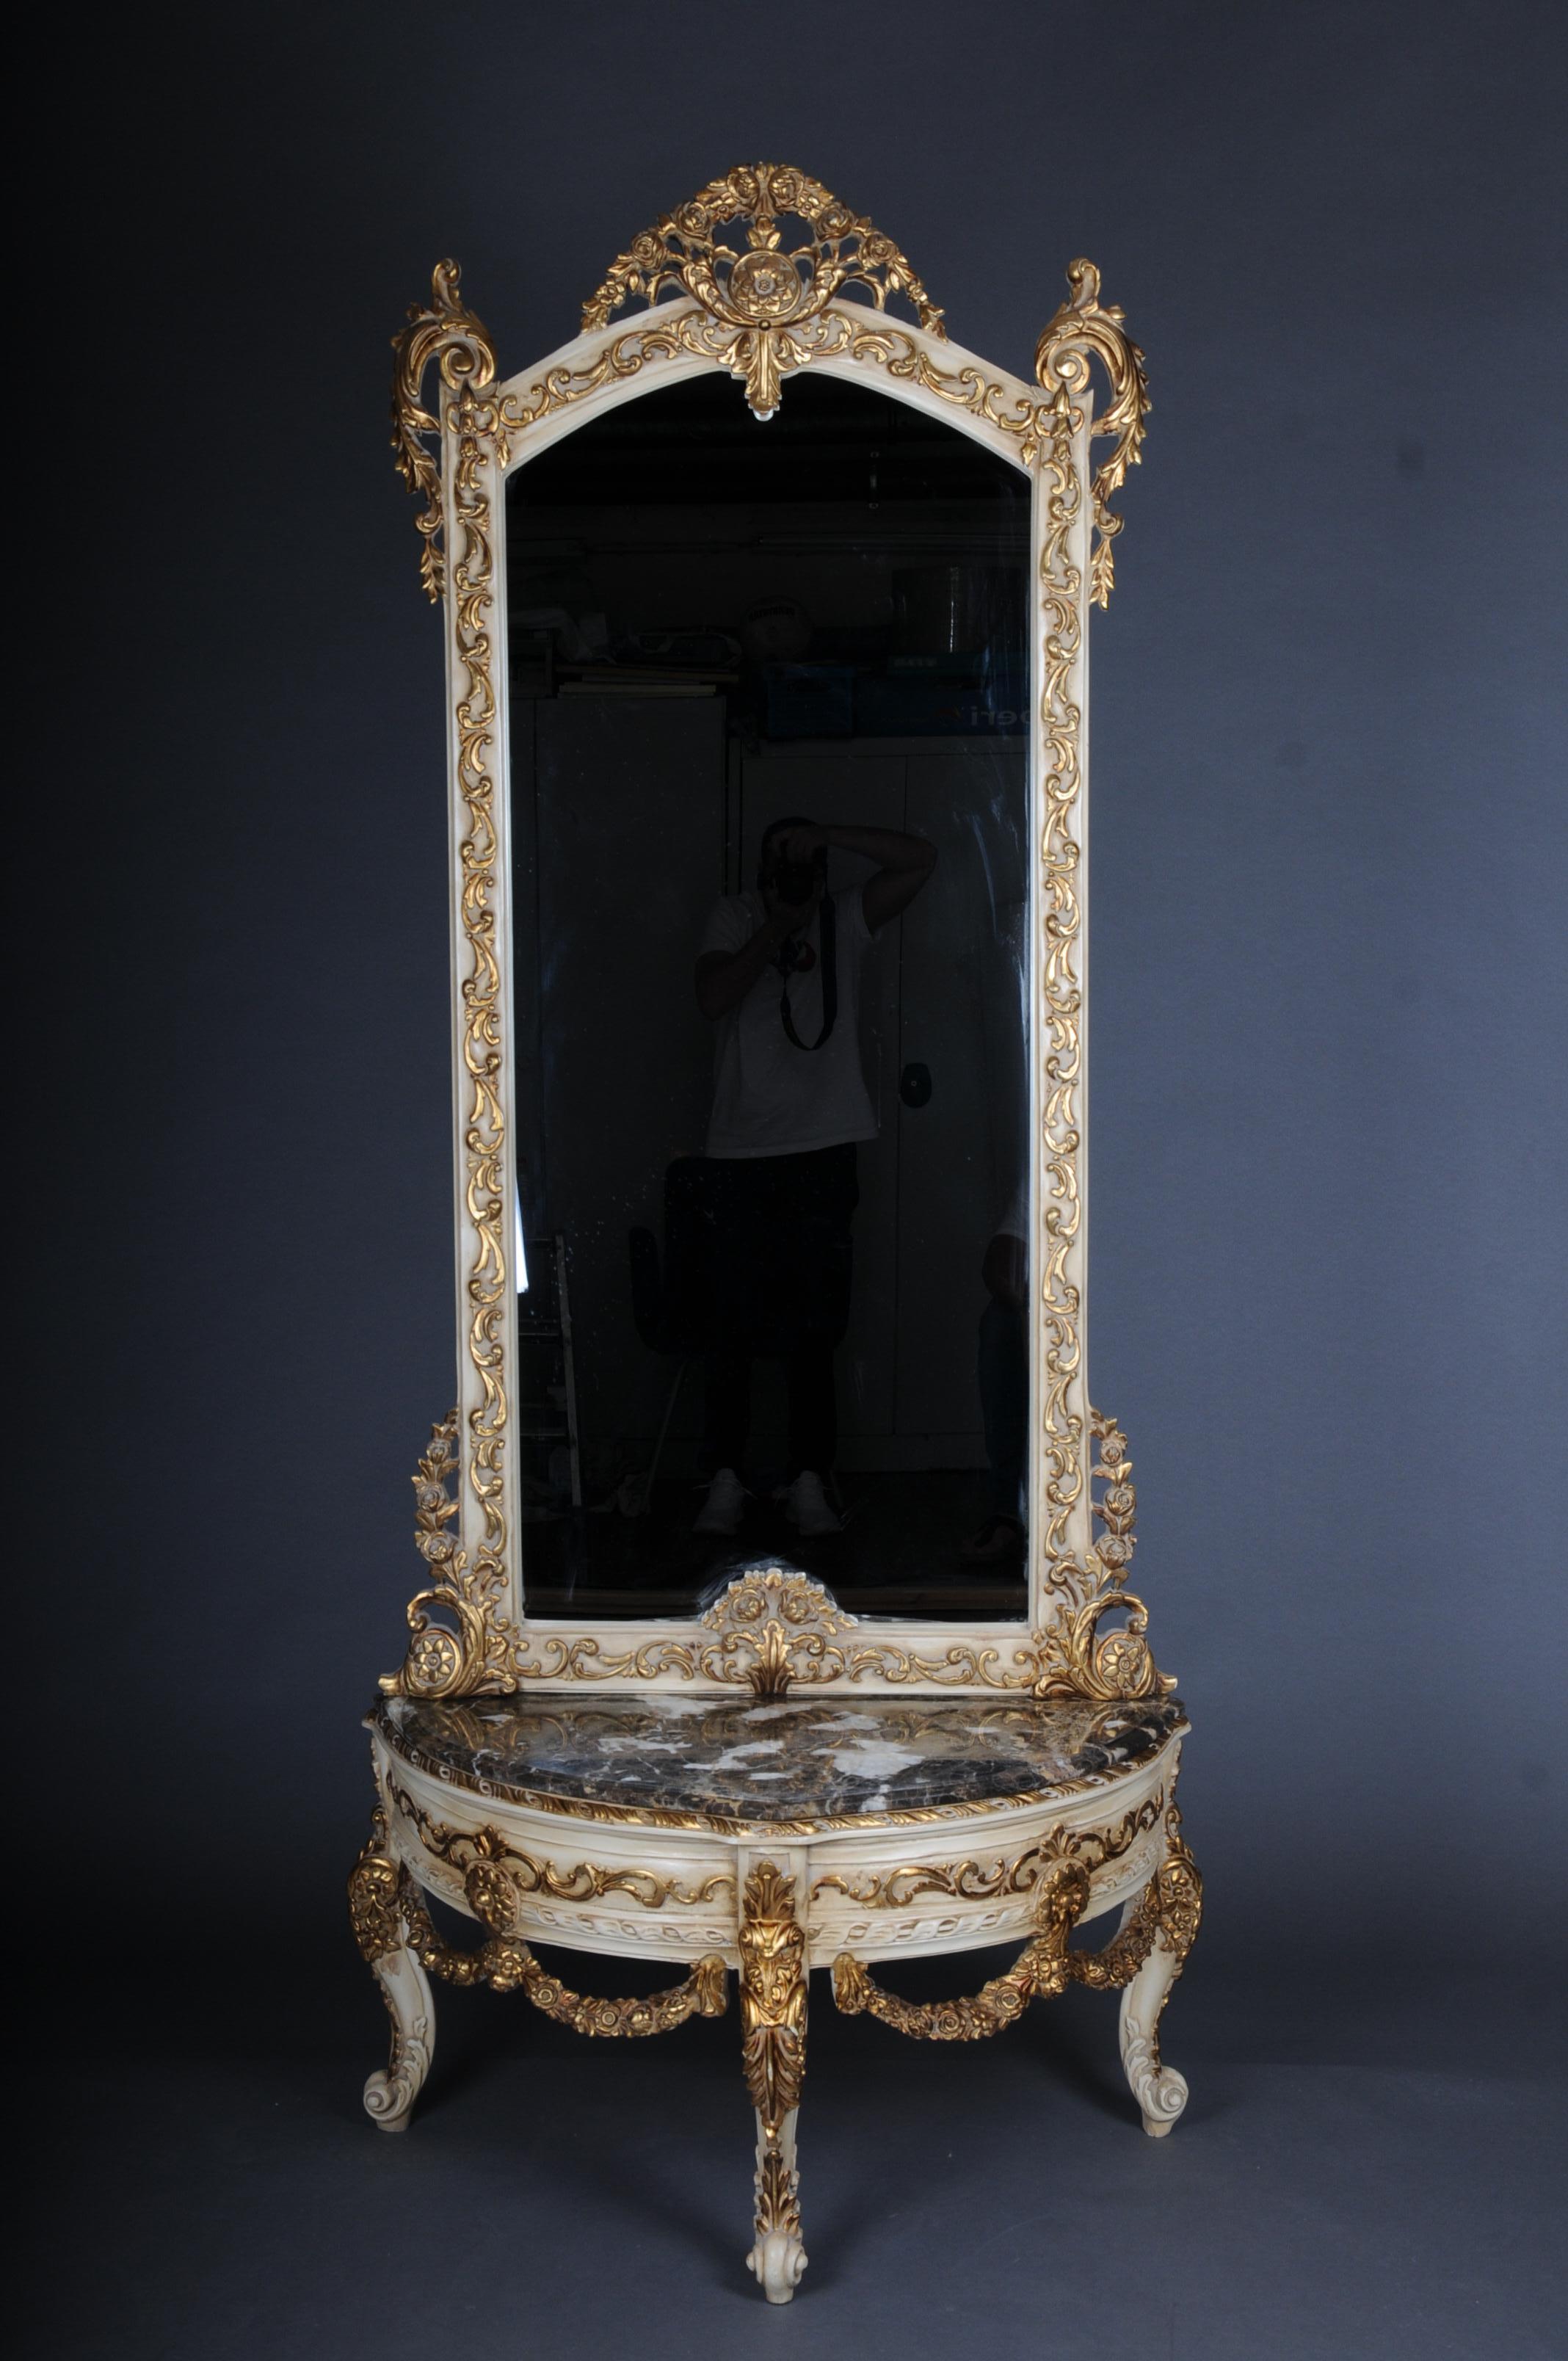 20th Century beautiful console mirror/floor mirror in the Louis XV, gilt beige.

Solid beechwood, carved and painted. Semicircular high-rectangular body on conical, fluted legs. Cambered frame with surrounding carvings, inlaid marble top. High